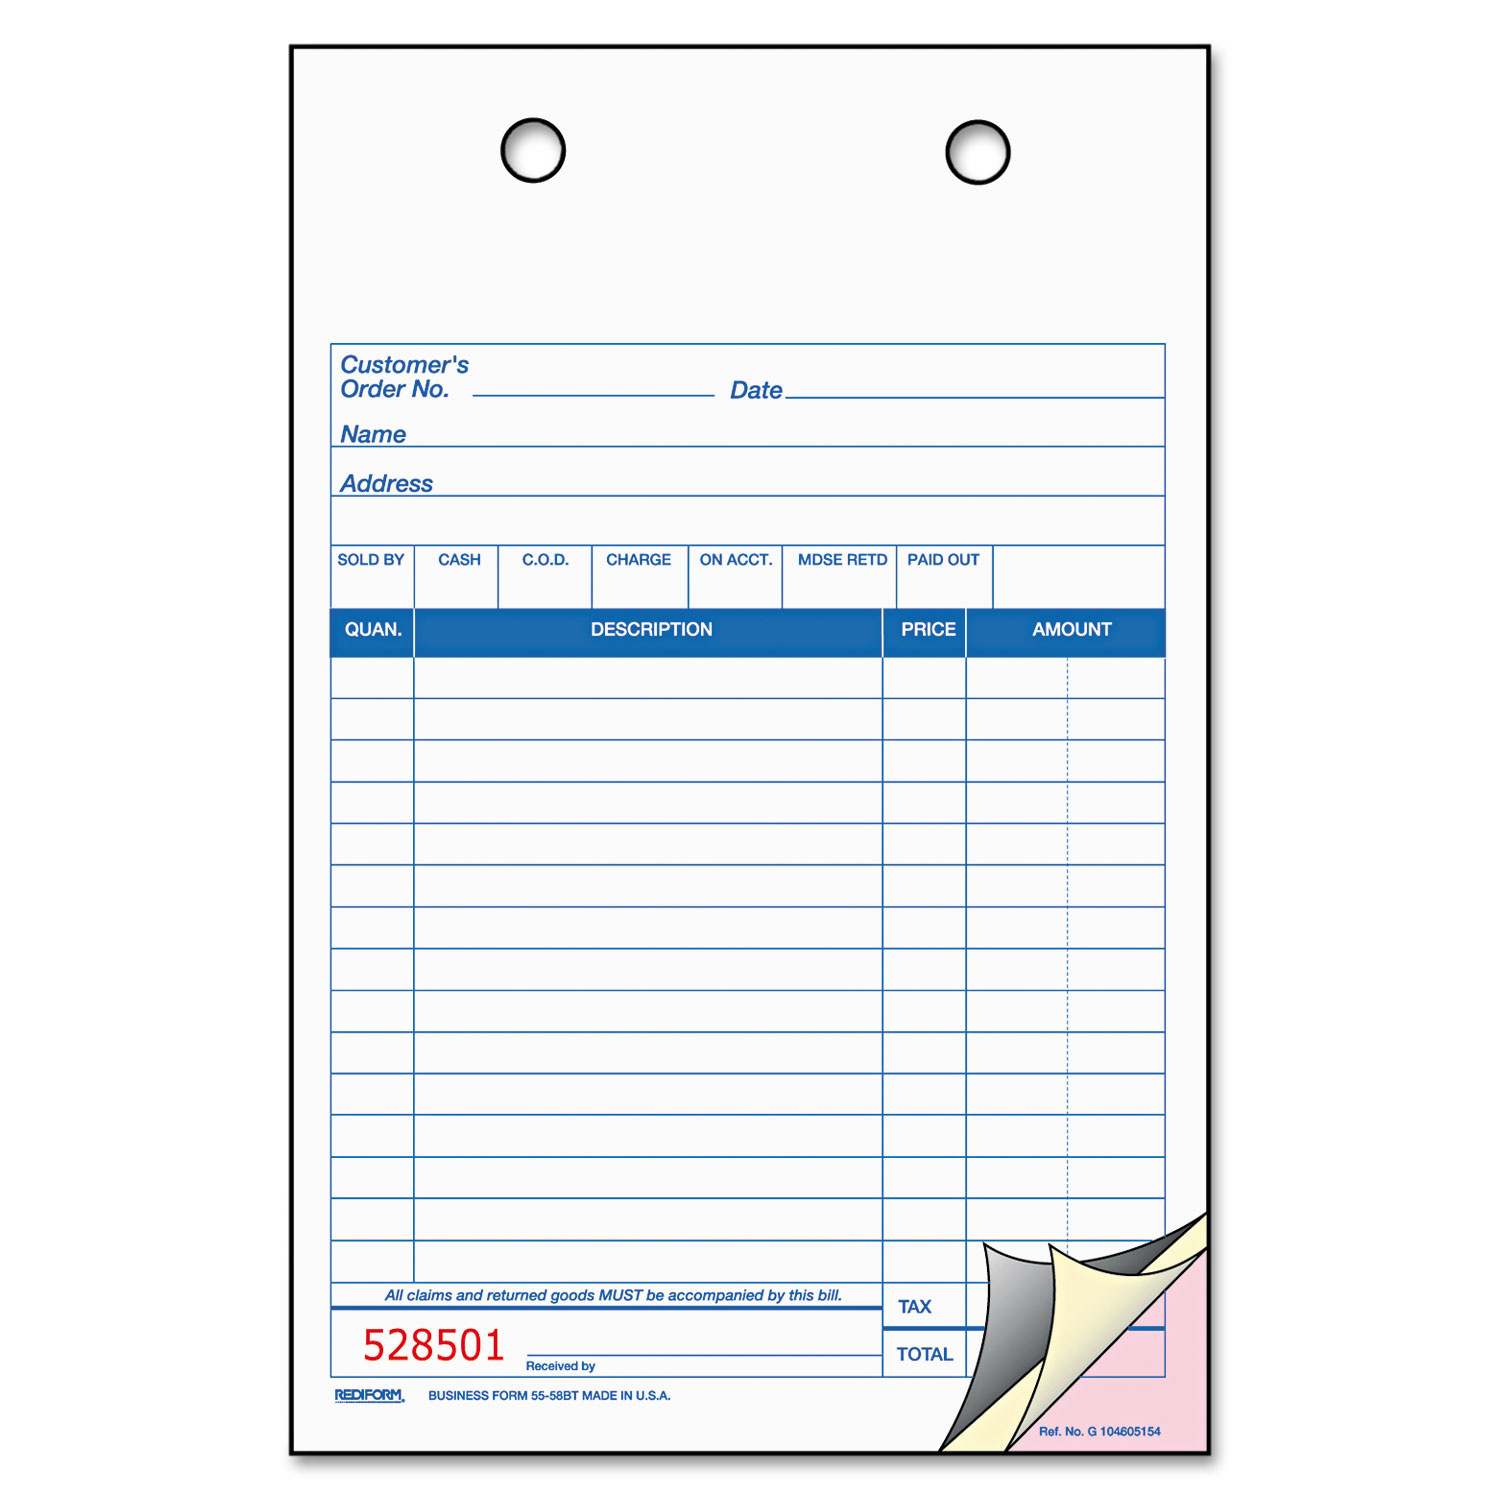 Rediform Sales Form for Registers, 1/2 x 1/2, Blue Print Three-Part,  500 Forms -RED5558BT